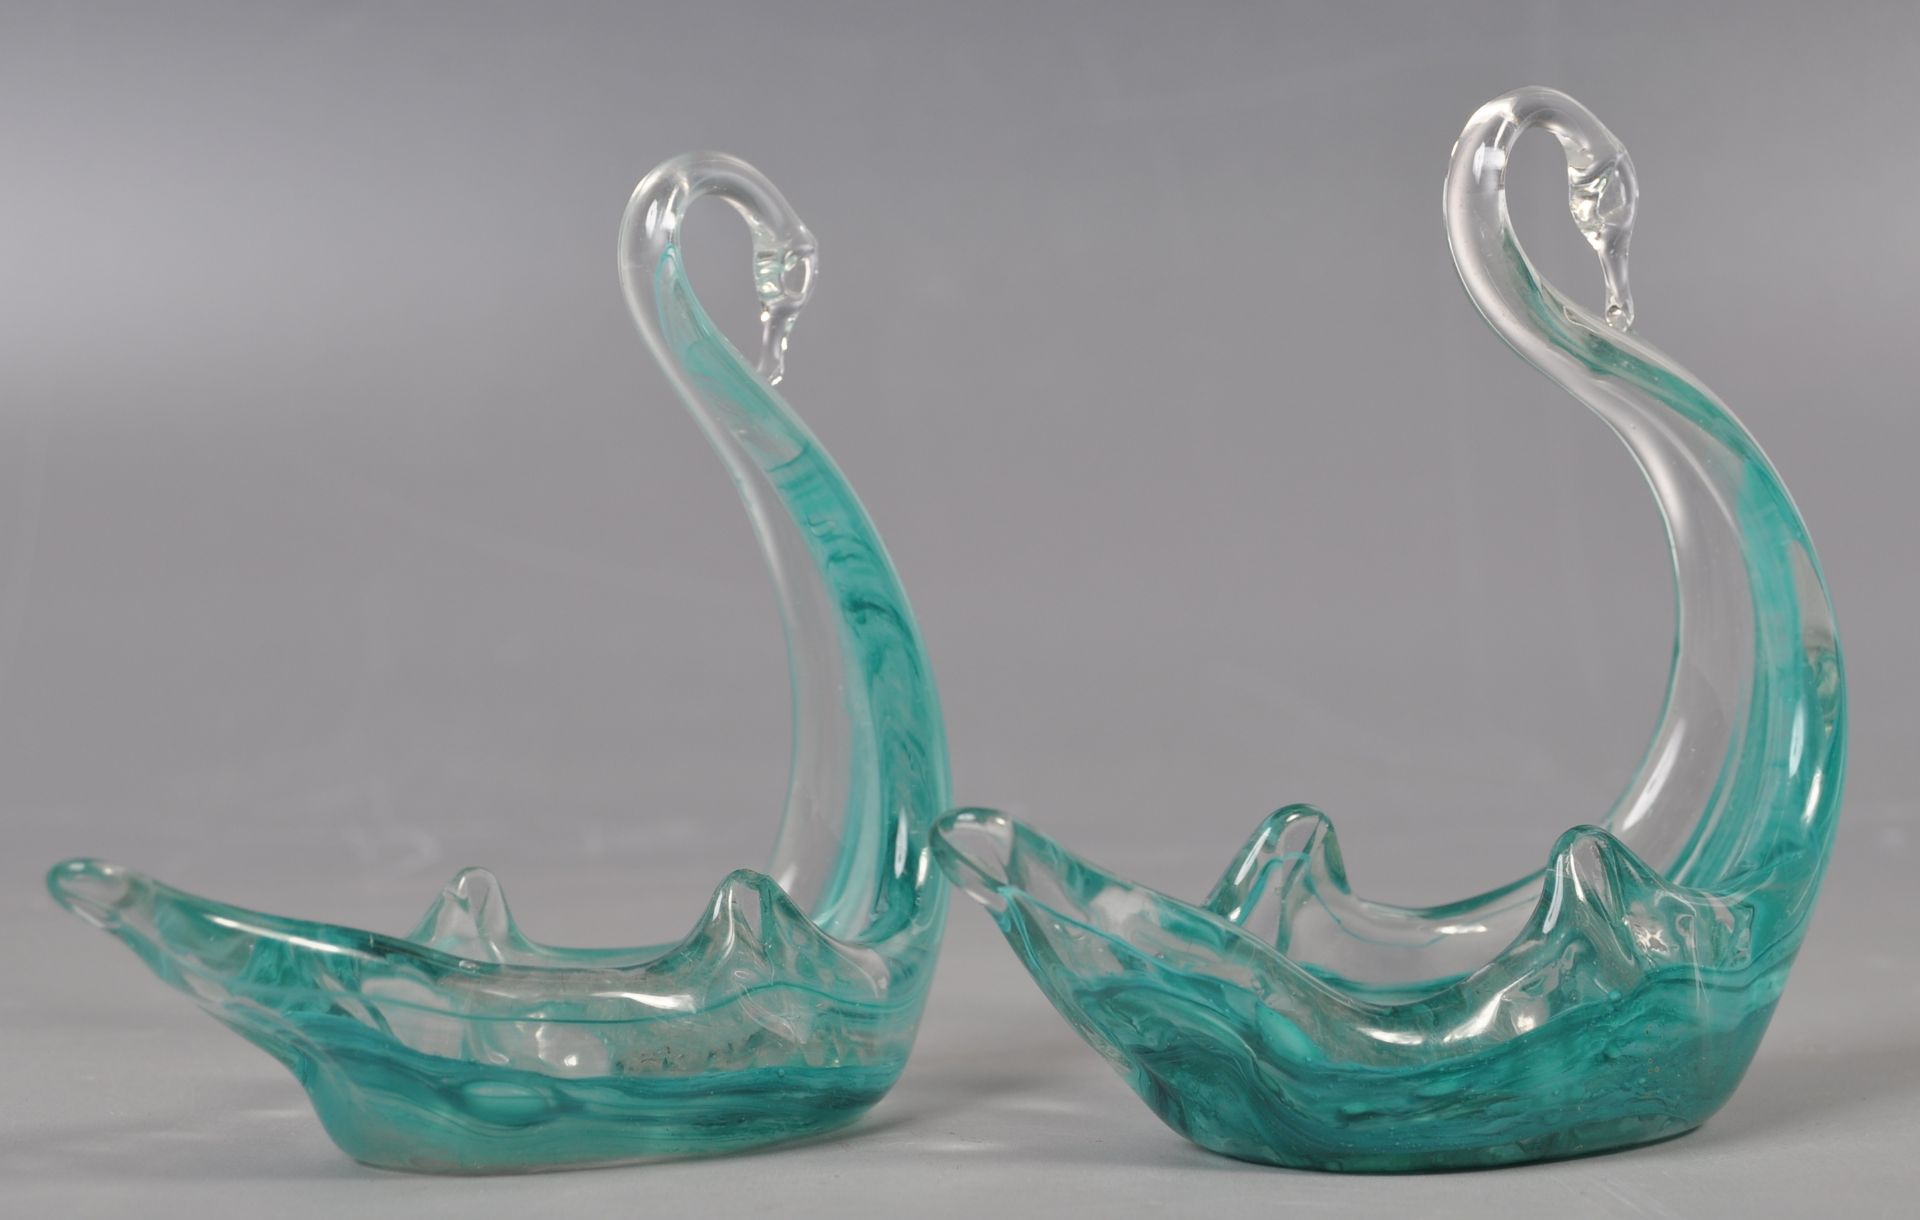 PAIR OF RETRO TURQUOISE GLASS TABLE SALTS / TRINKET DISHES IN THE FORMS OF SWANS - Image 2 of 4